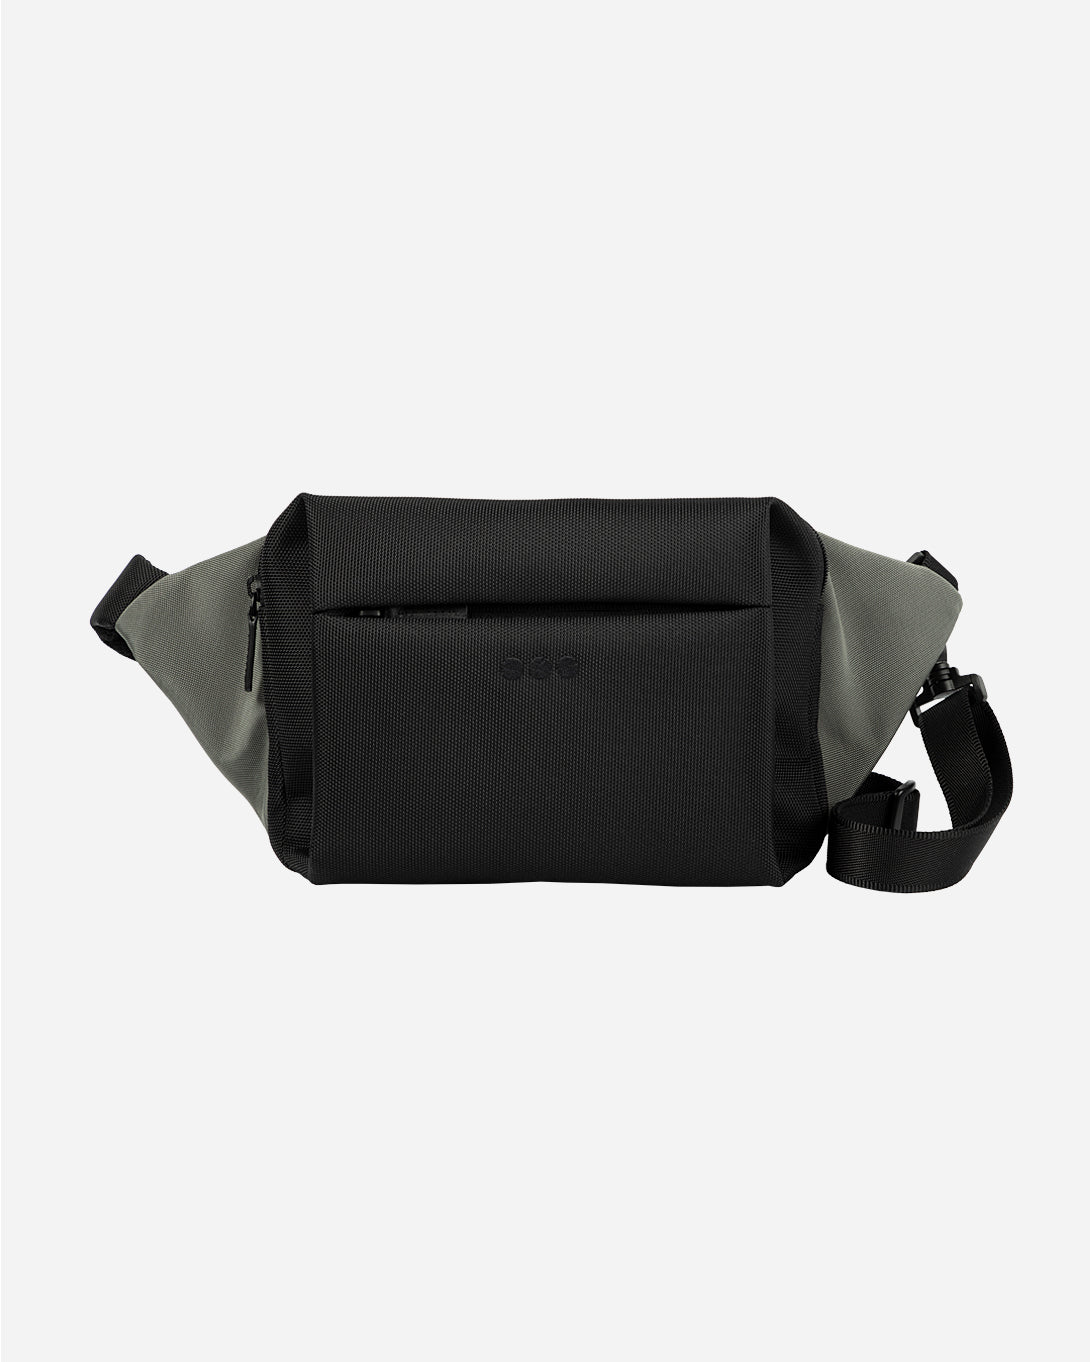 Charcoal All-Things Sling ONS Clothing Accessory Bag